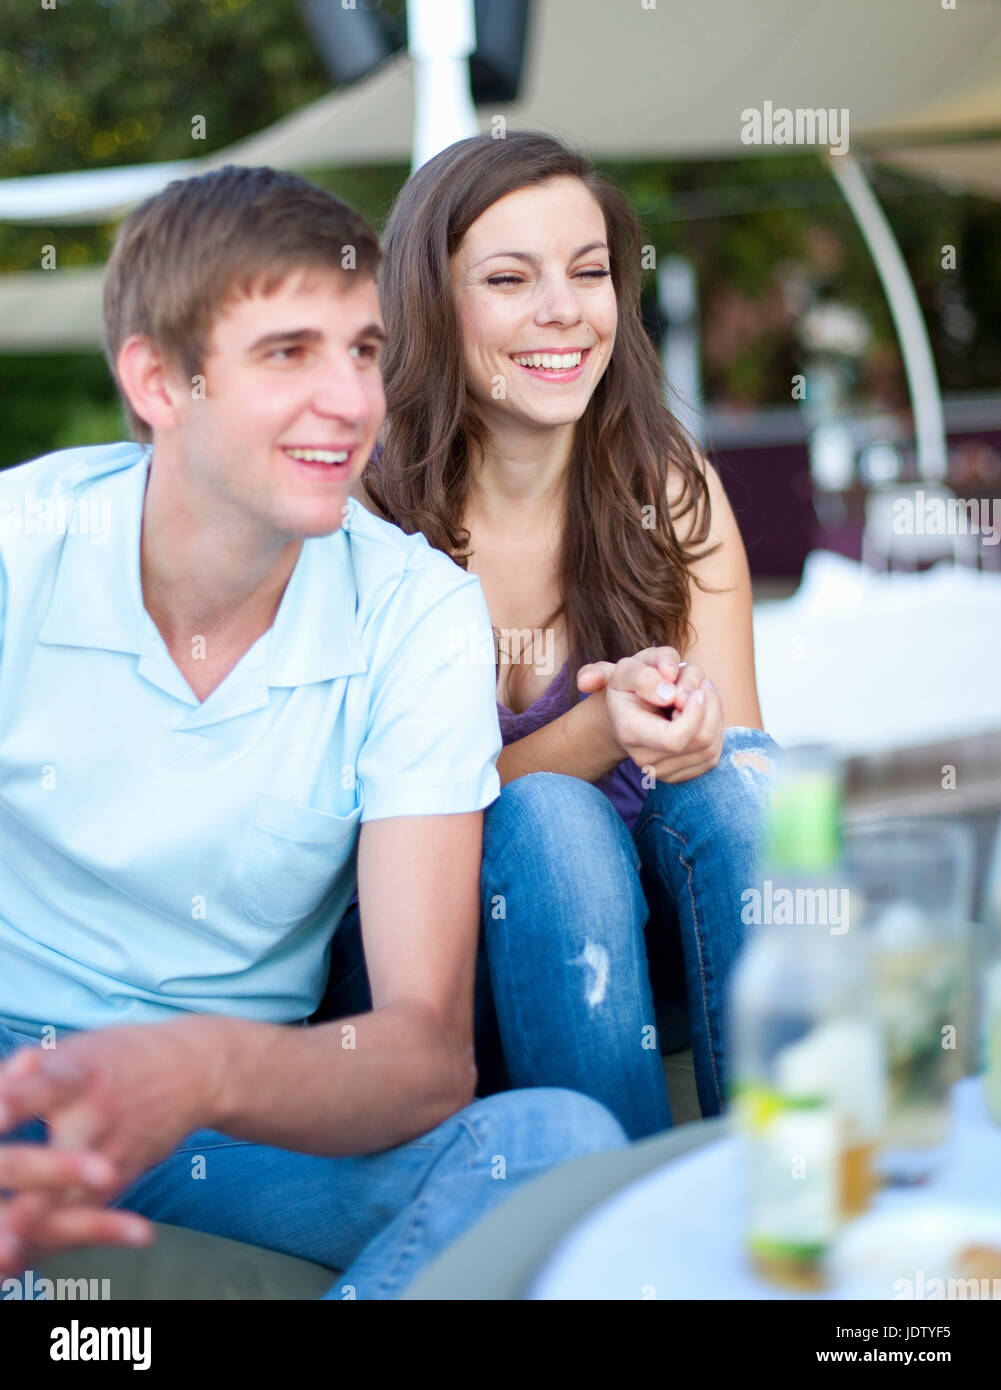 Smiling couple sitting together outdoors Stock Photo